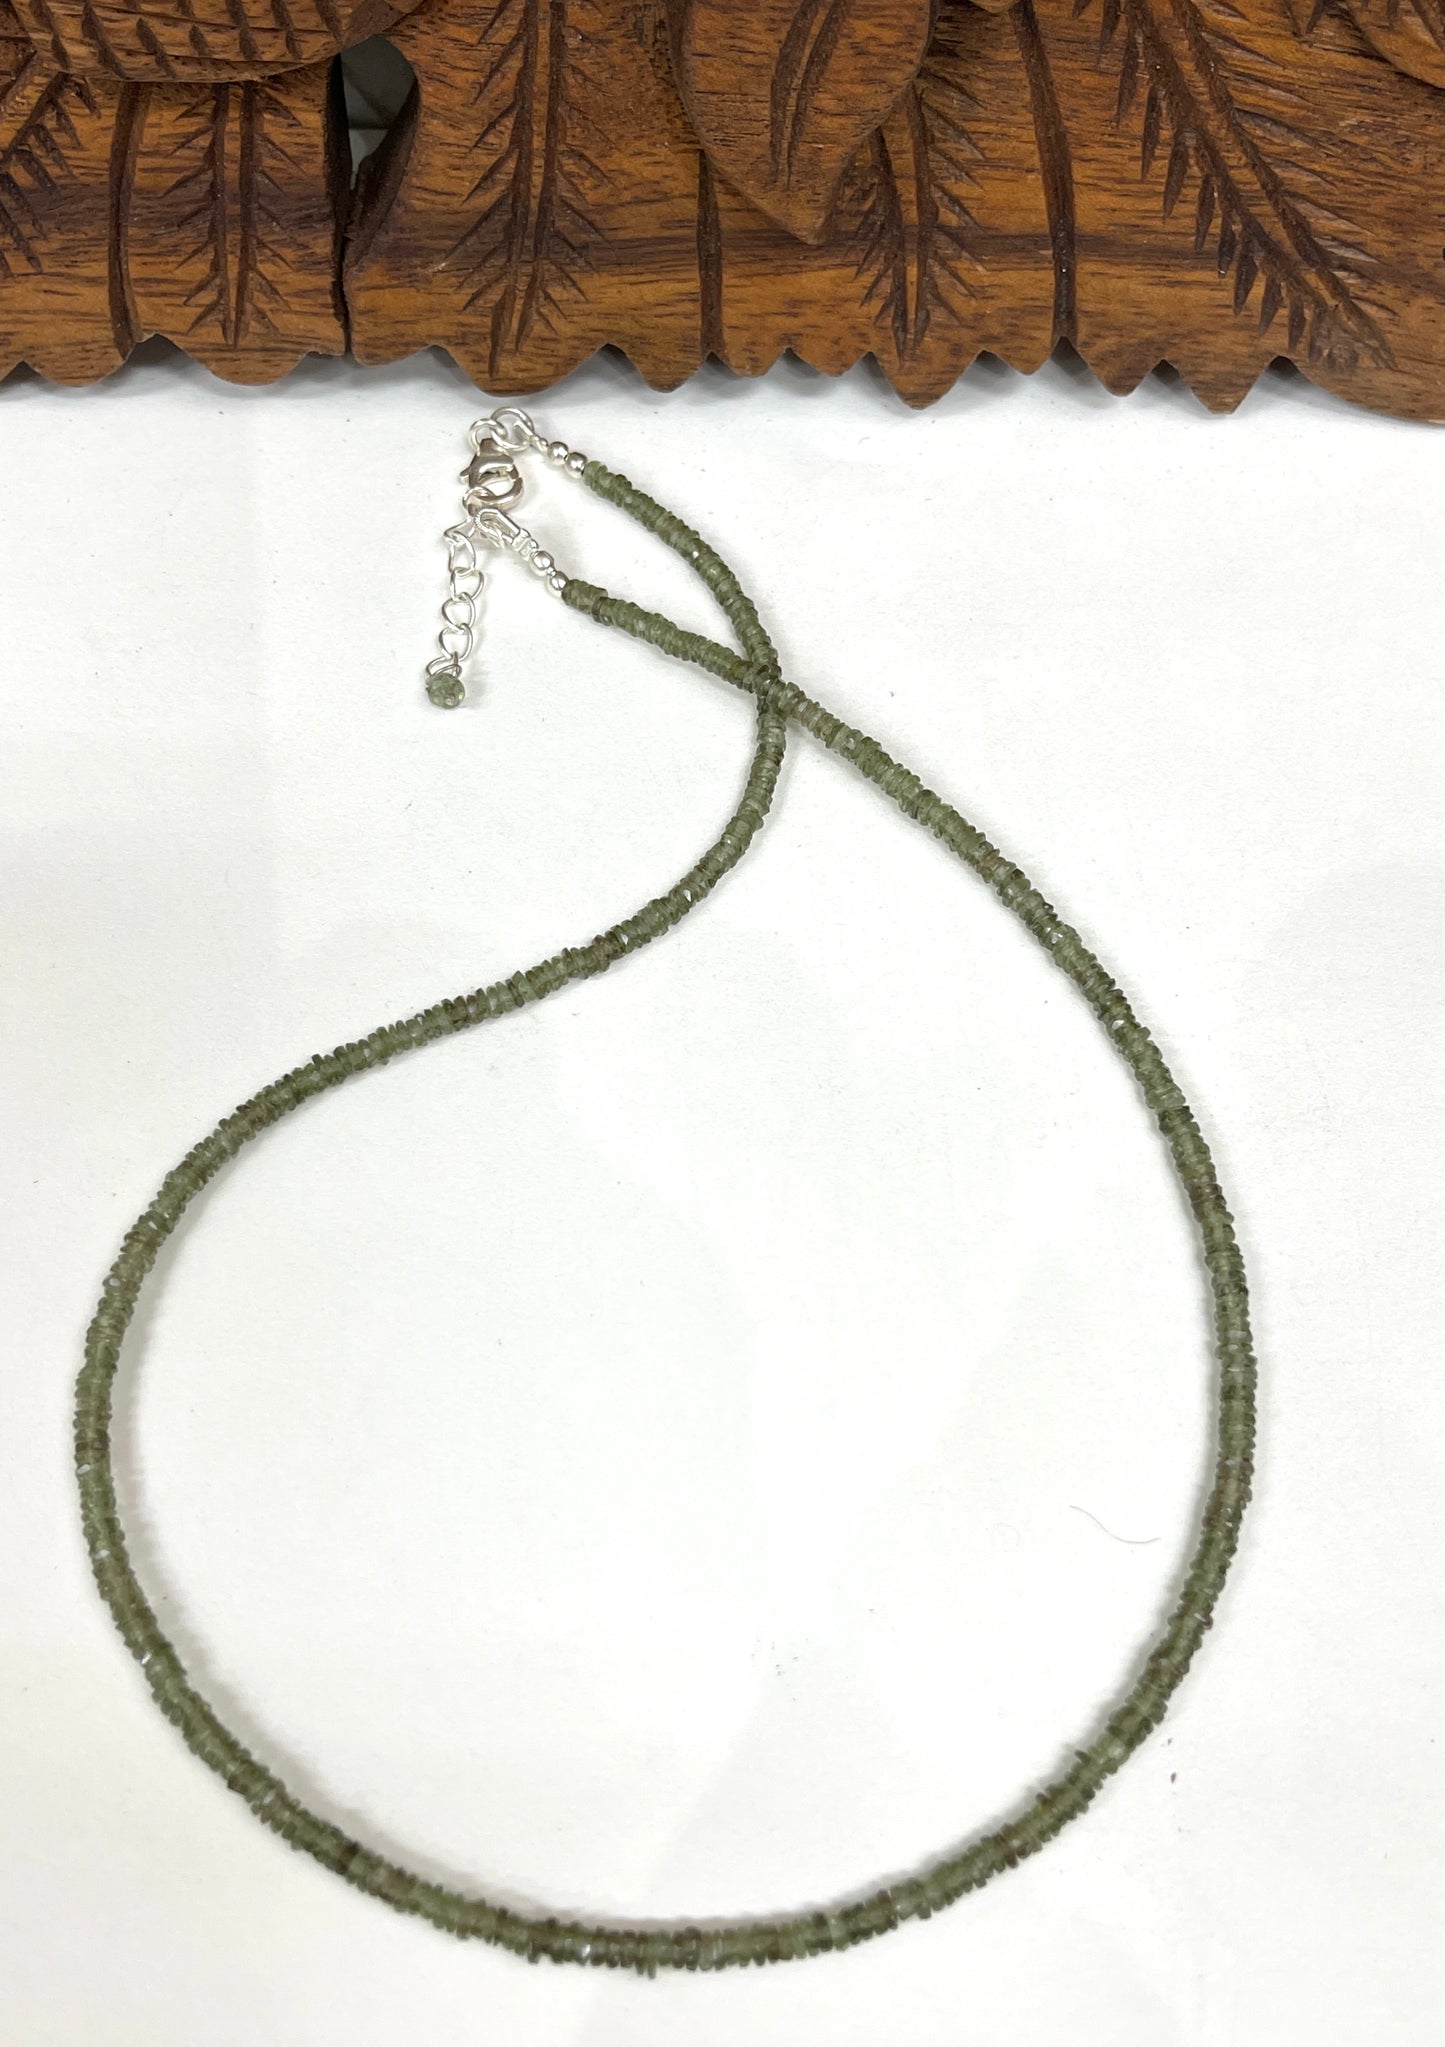 3.3mm Faceted Moldavite Necklace - Transformation Stone